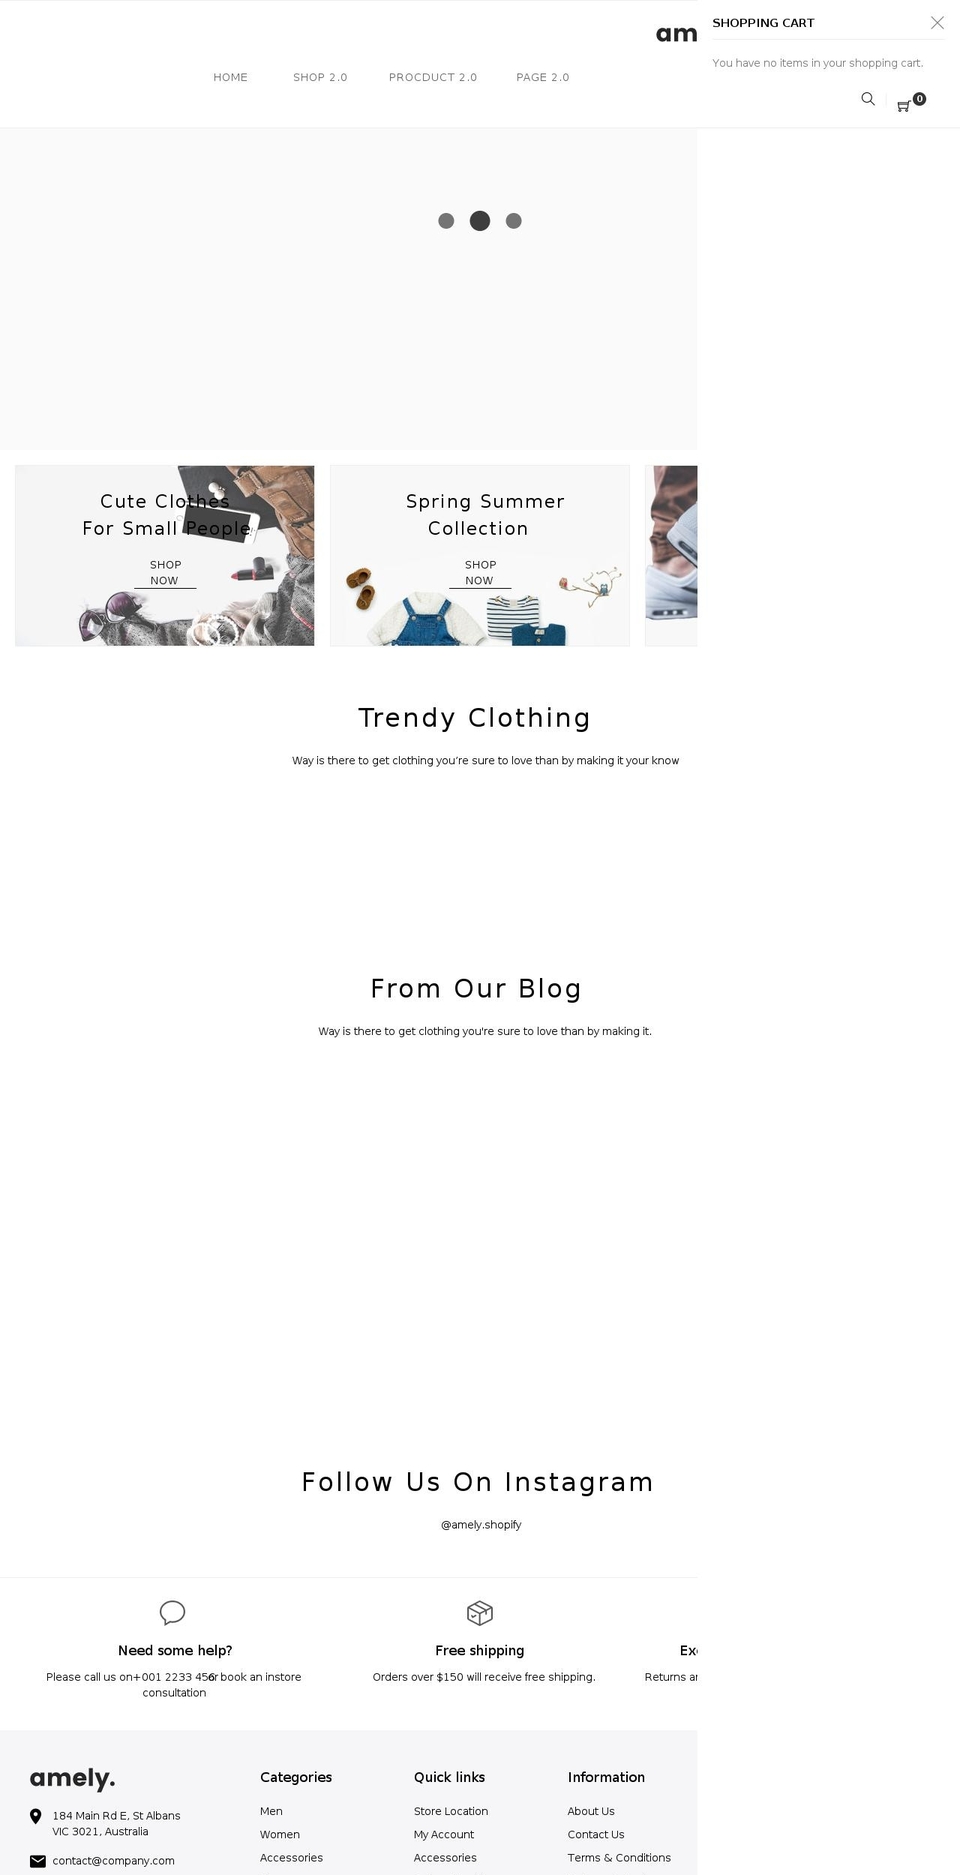 Amely Shopify theme site example arrow-amely.myshopify.com